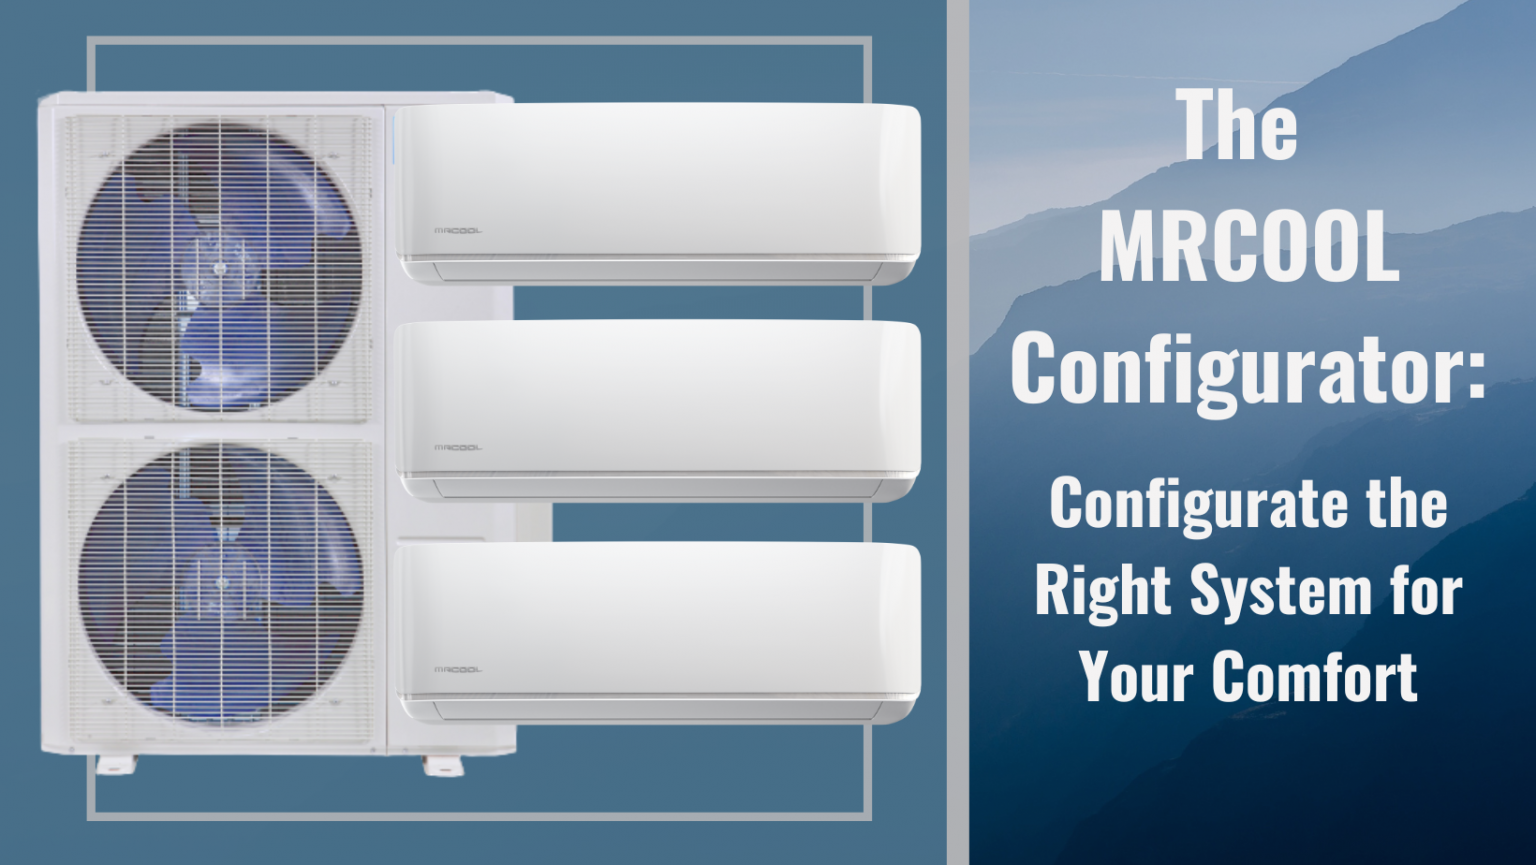 The MRCOOL Configurator: Configurate the Right System for Your Comfort